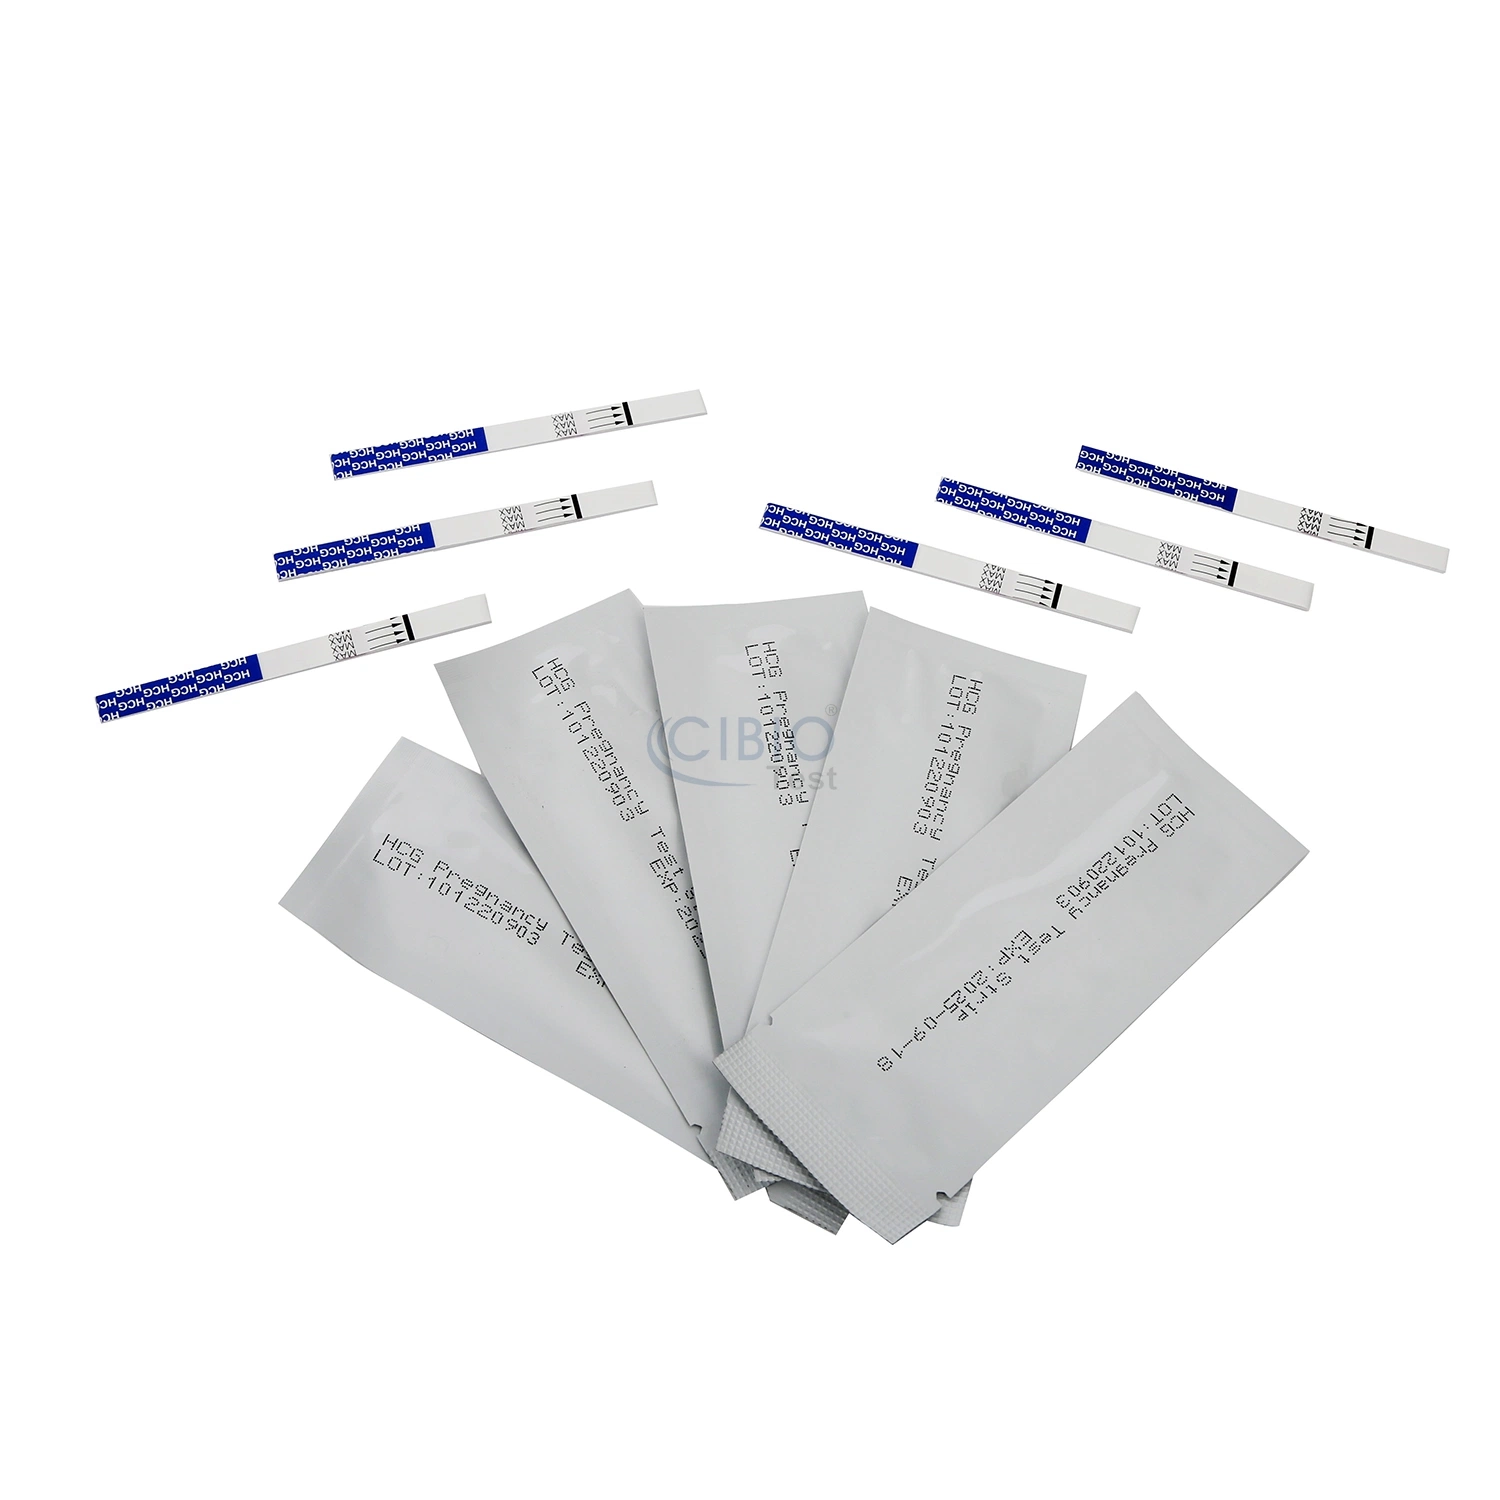 CE Marked Other Household Medical Devices Urine HCG Pregnancy Test Kits Strip